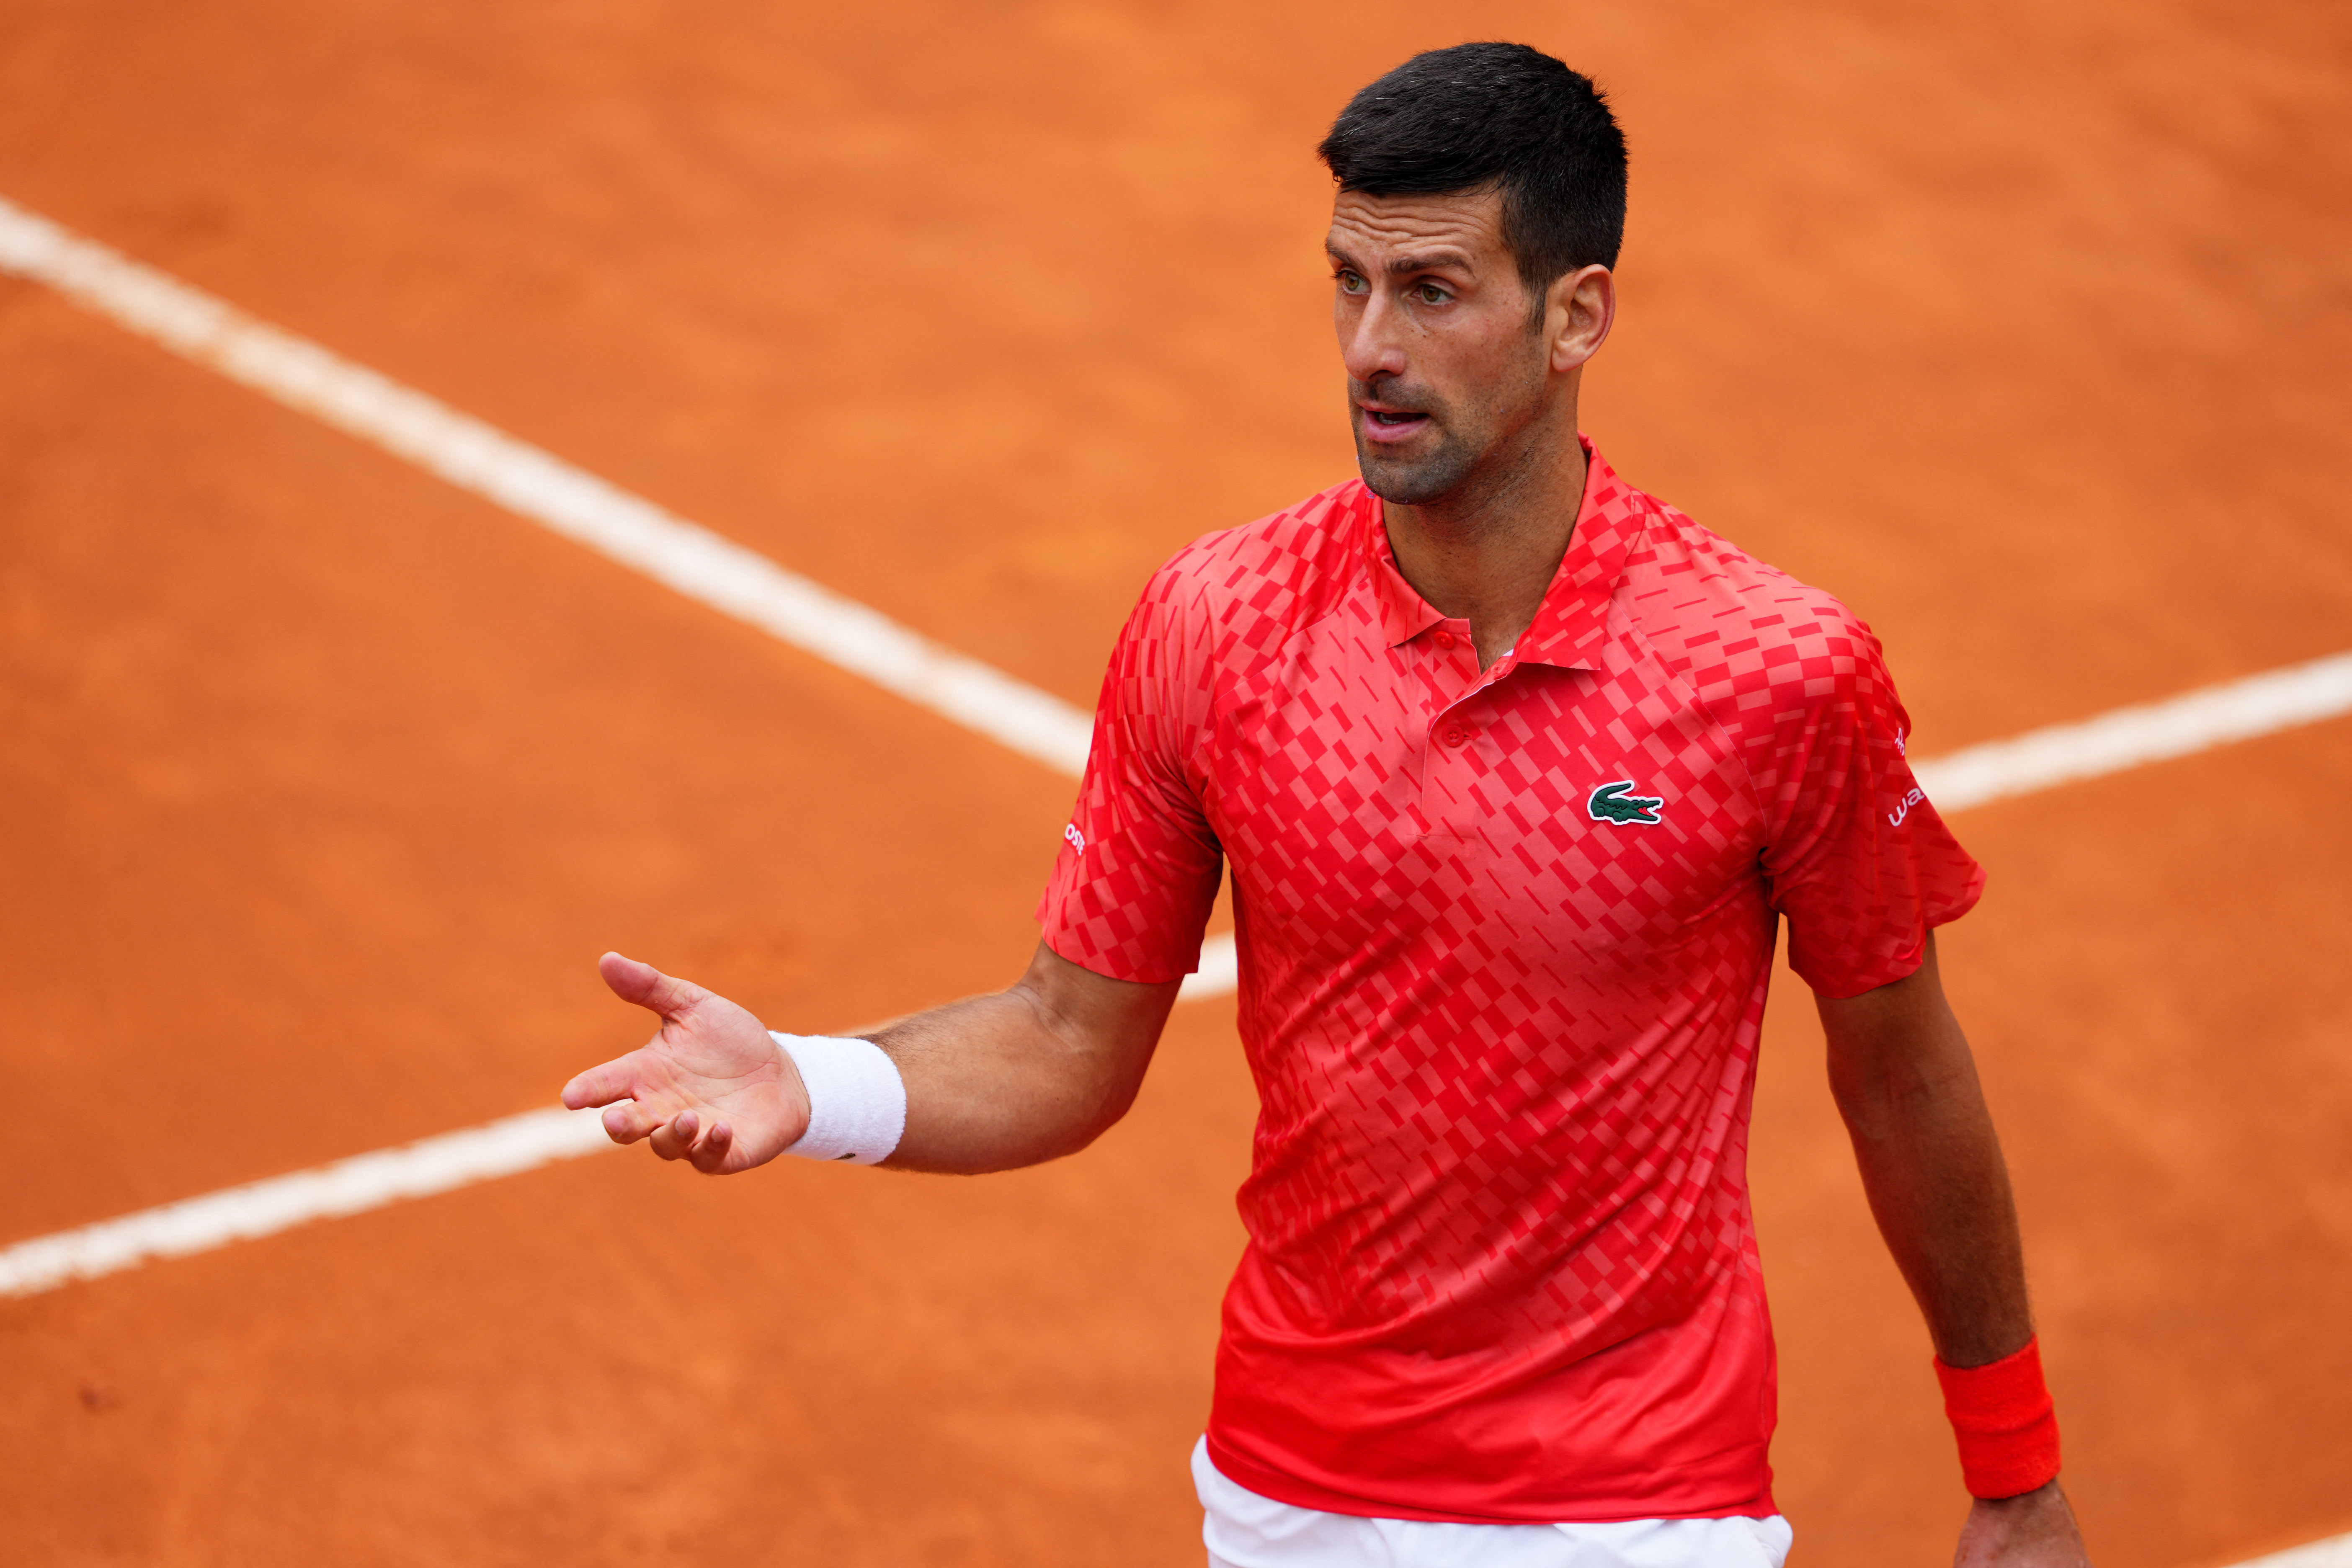 Djokovic fumes at Norries attitude in fiery clash Reuters